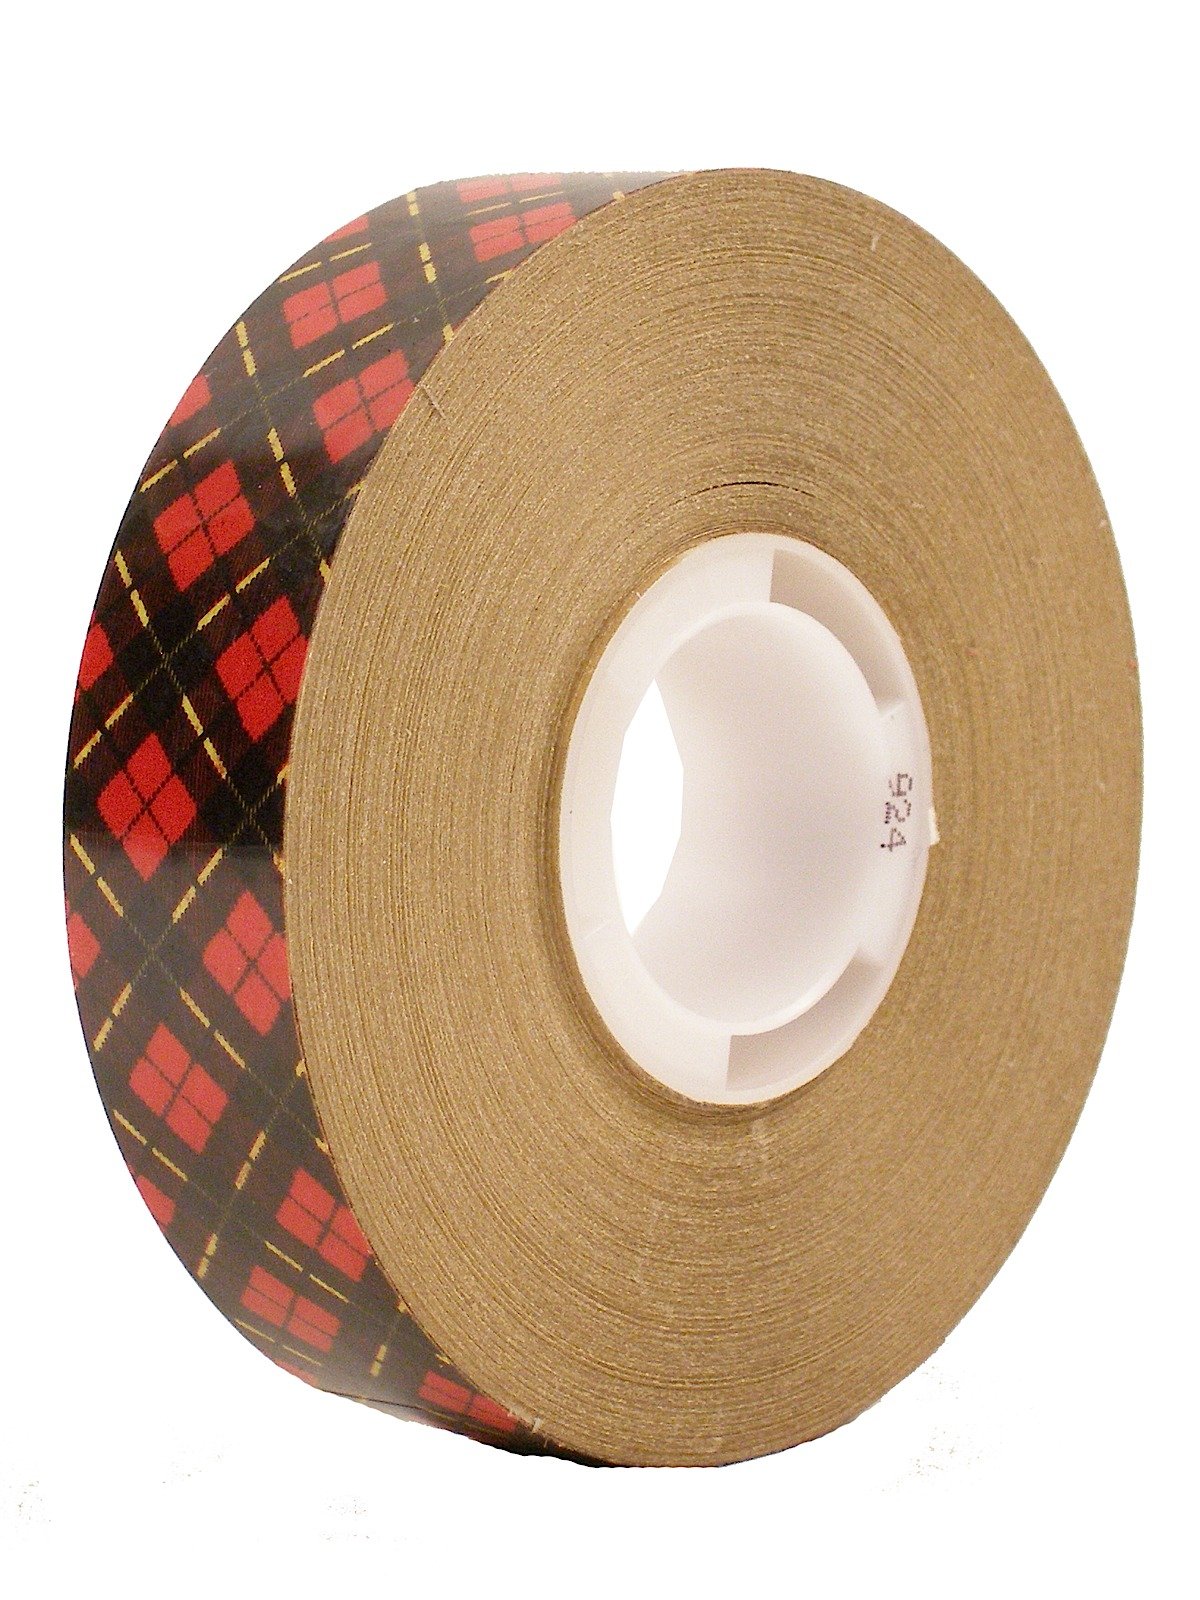 3M SCOTCH BRAND 924 ADHESIVE TRANSFER TAPE double sided stick 3/4" 36 yards 